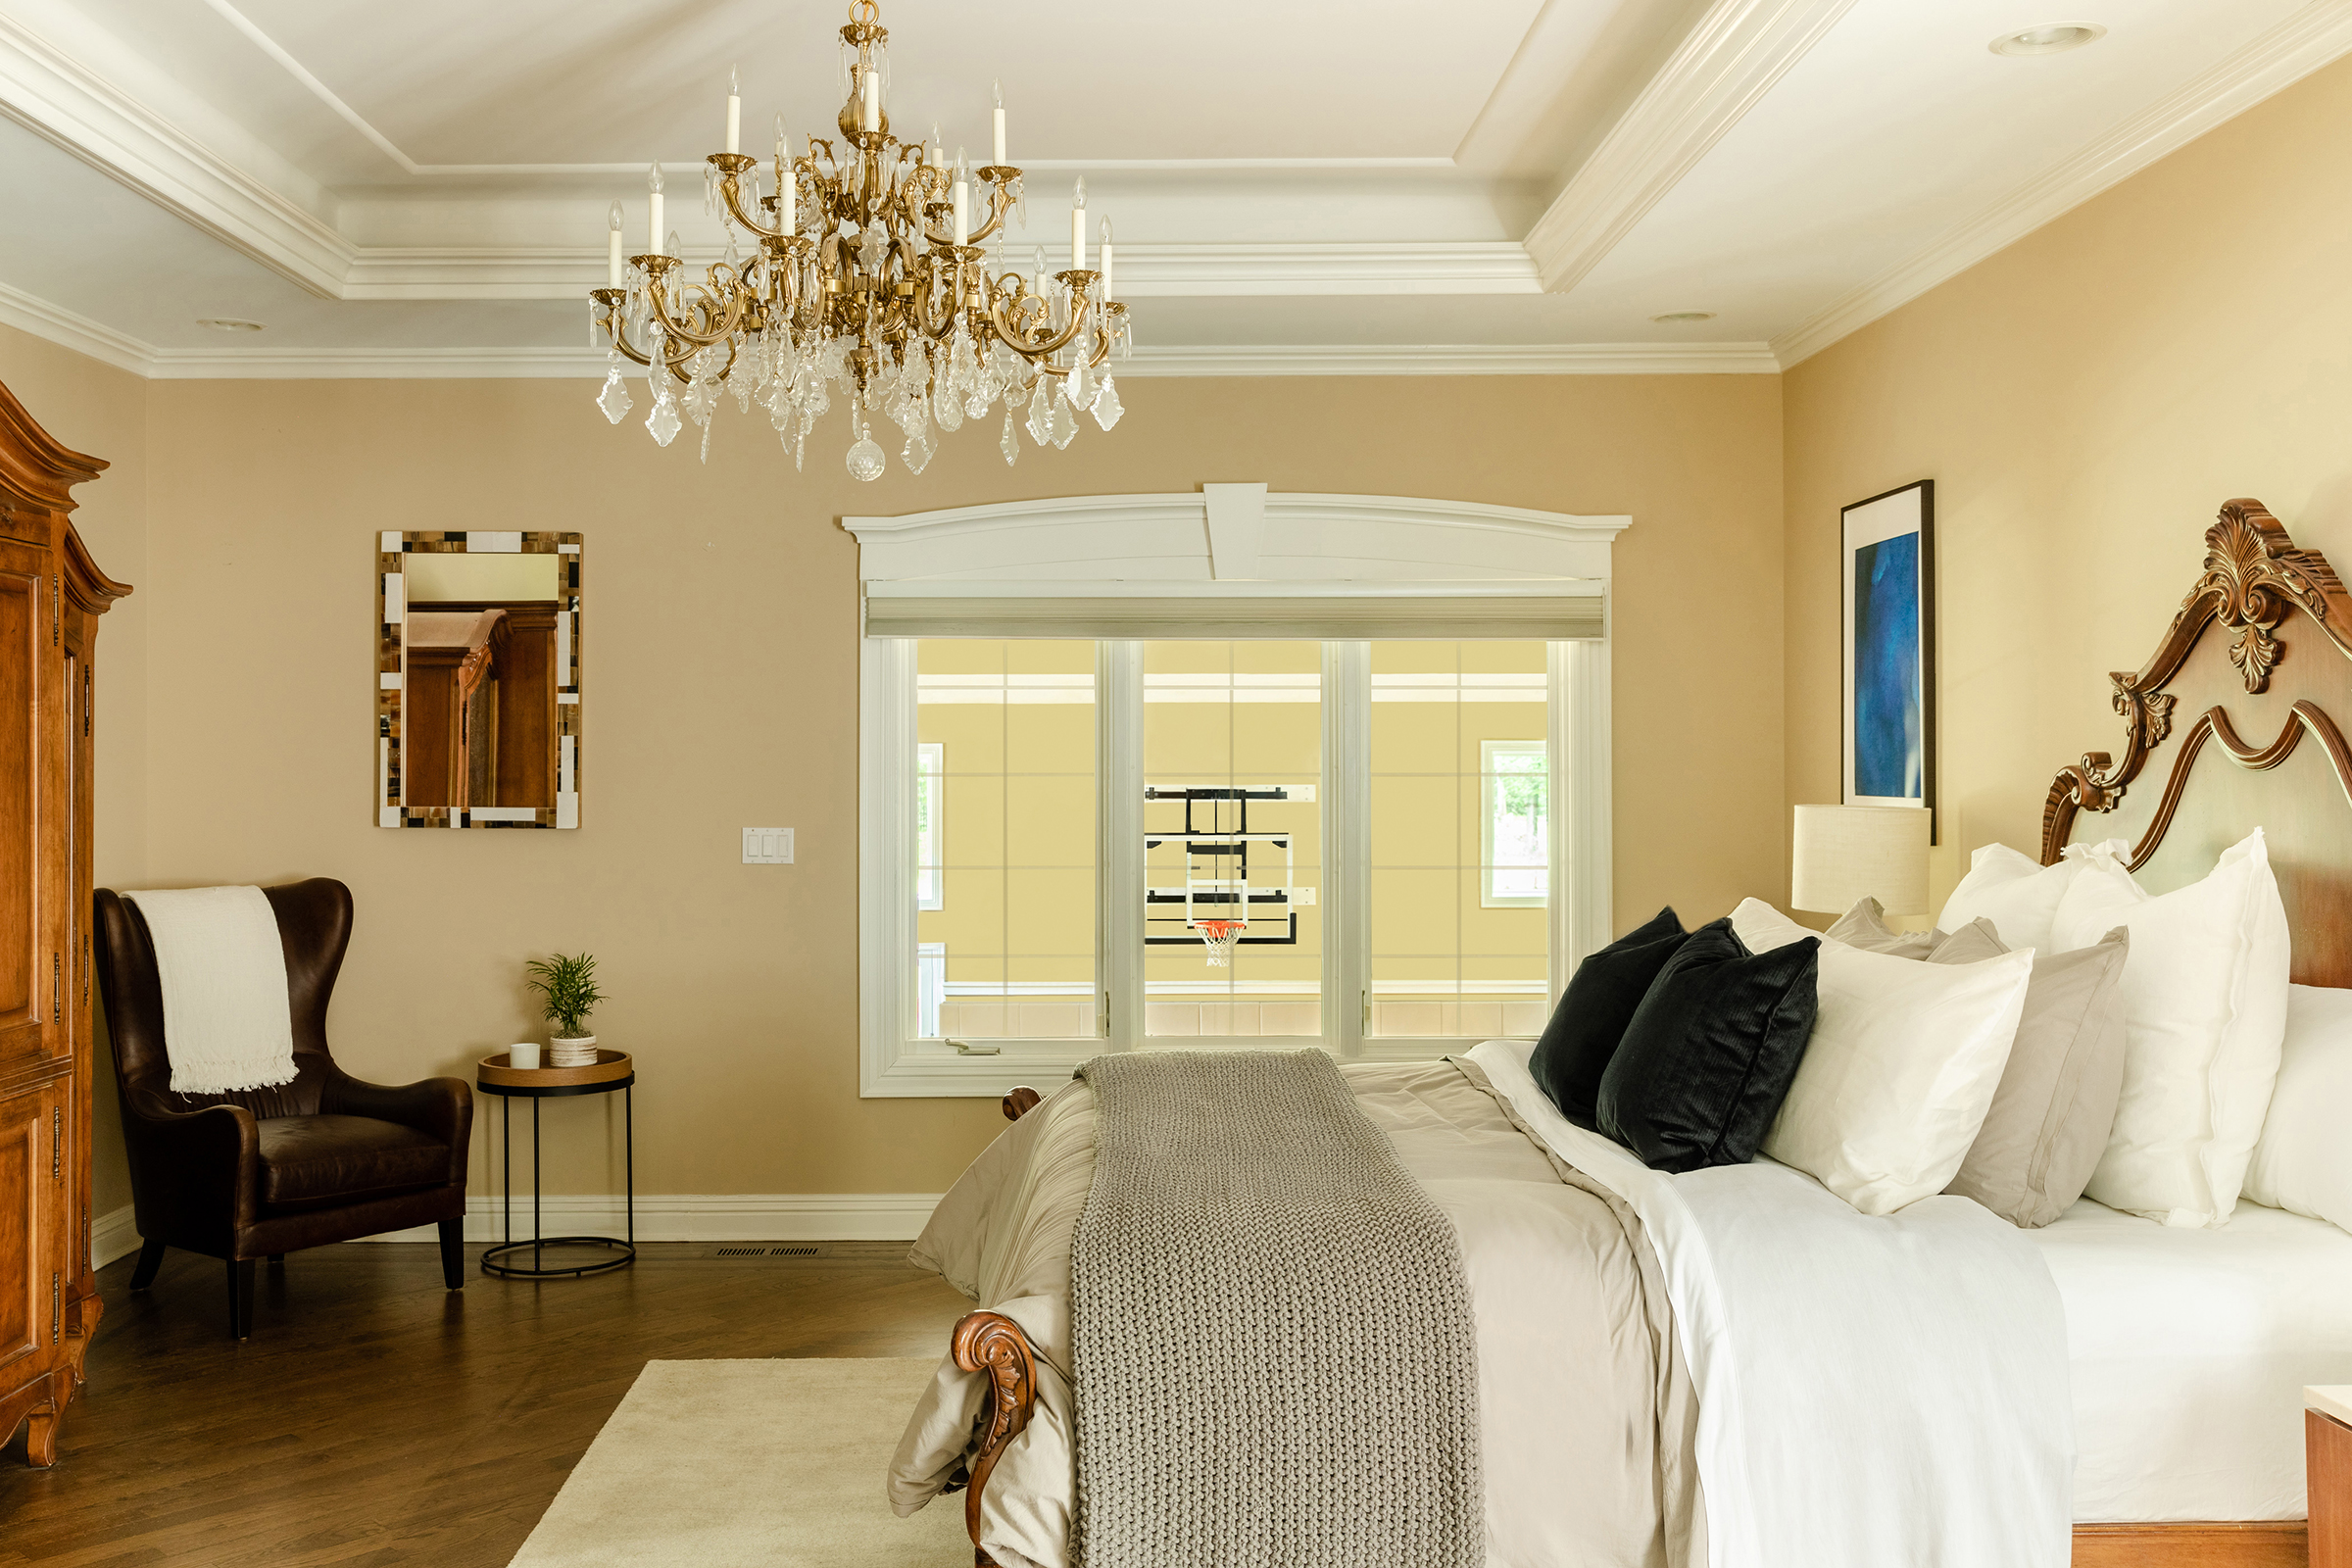 The bedroom features an elaborate chandelier, large comfortable bed, and windows that overlook the indoor basketball court.